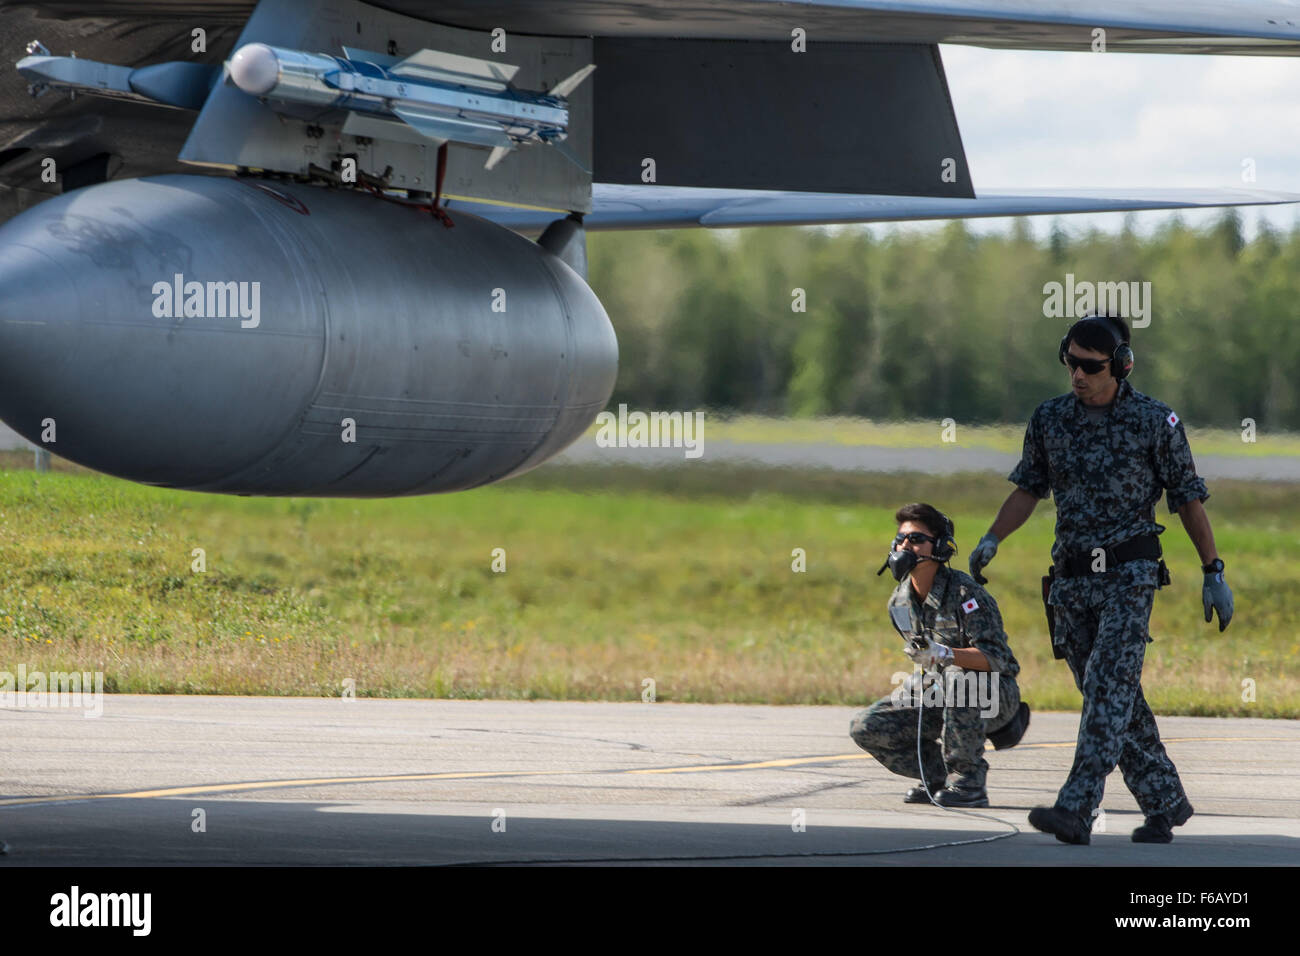 A Japan Air Self-Defense Force (JASDF) crew chief performs pre-flight inspections on an F-15J Eagle at Eielson Air Force Base, Alaska, Aug. 14, 2015, during Red Flag-Alaska (RF-A) 15-3. RF-A is a series of Pacific Air Forces commander-directed field training exercises for U.S. and partner nation forces, providing combined offensive counter-air, interdiction, close air support and large force employment training in a simulated combat environment. (U.S. Air Force photo by Staff Sgt. Joshua Turner/Released) Stock Photo